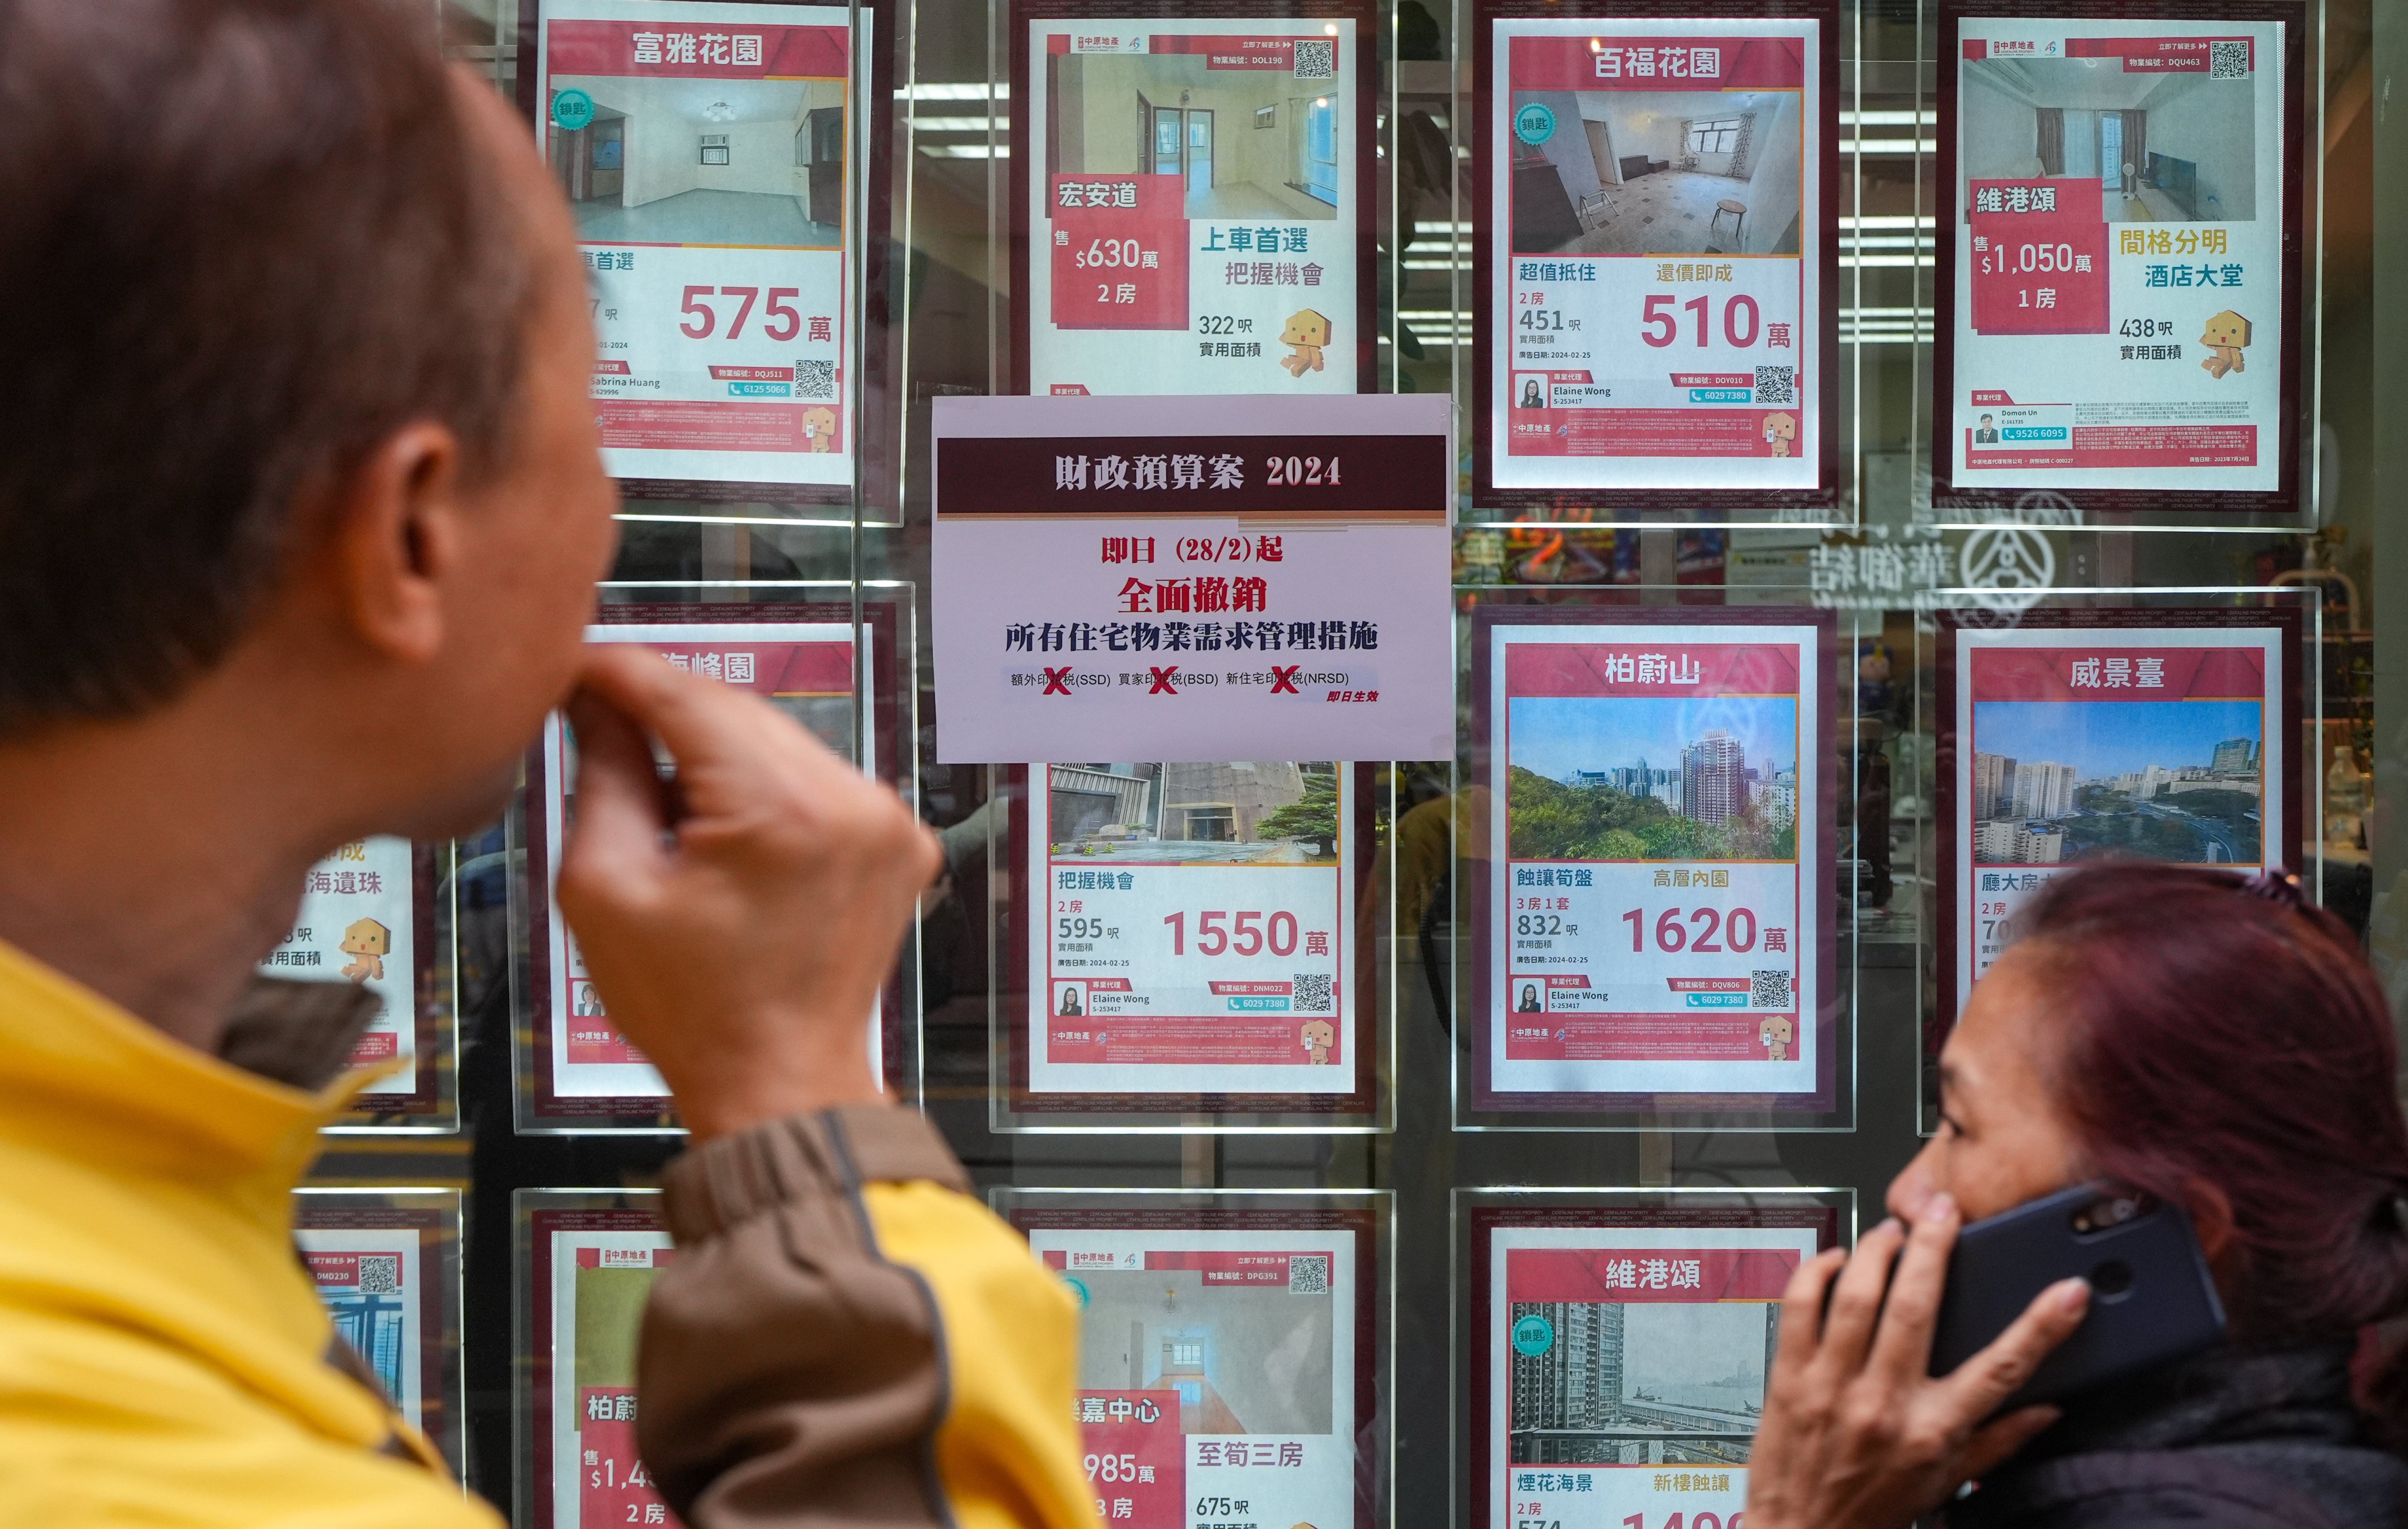 The end of restrictions designed to cool the property market are highlighted in the window of a property agency Photo: Eugene Lee